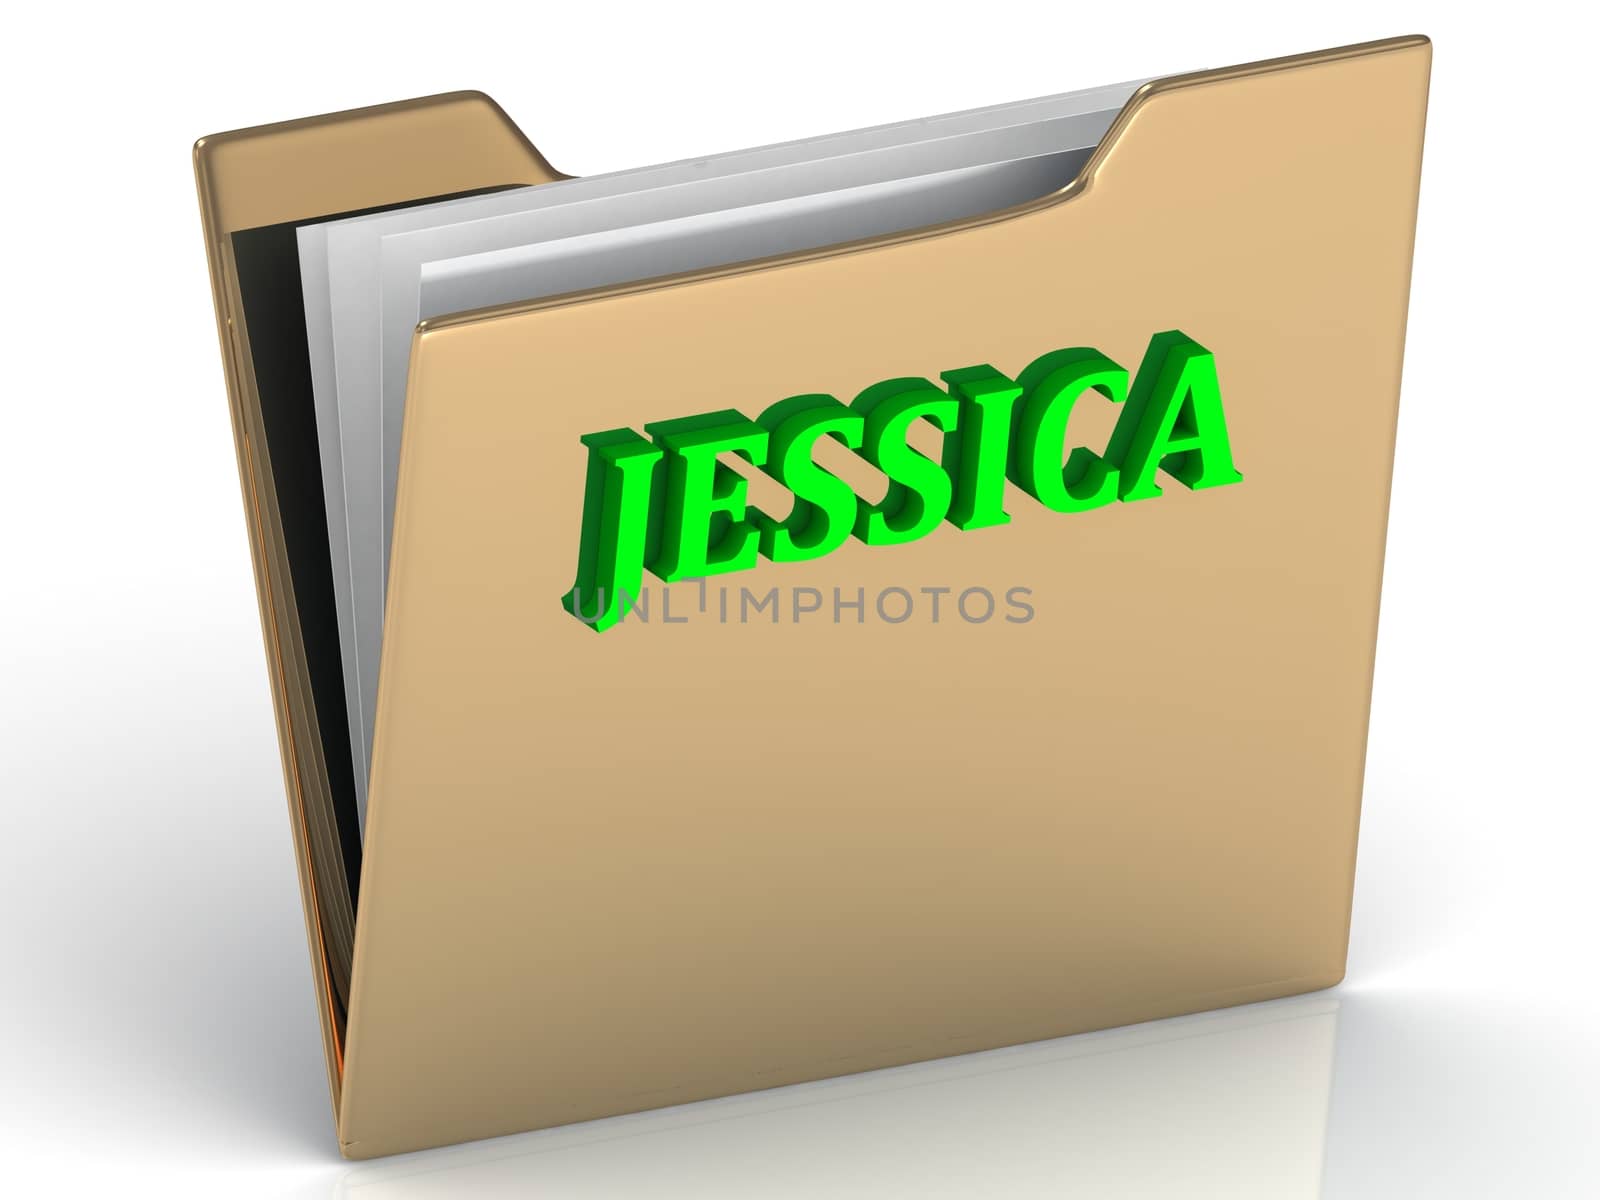 JESSICA- bright green letters on gold paperwork folder by GreenMost